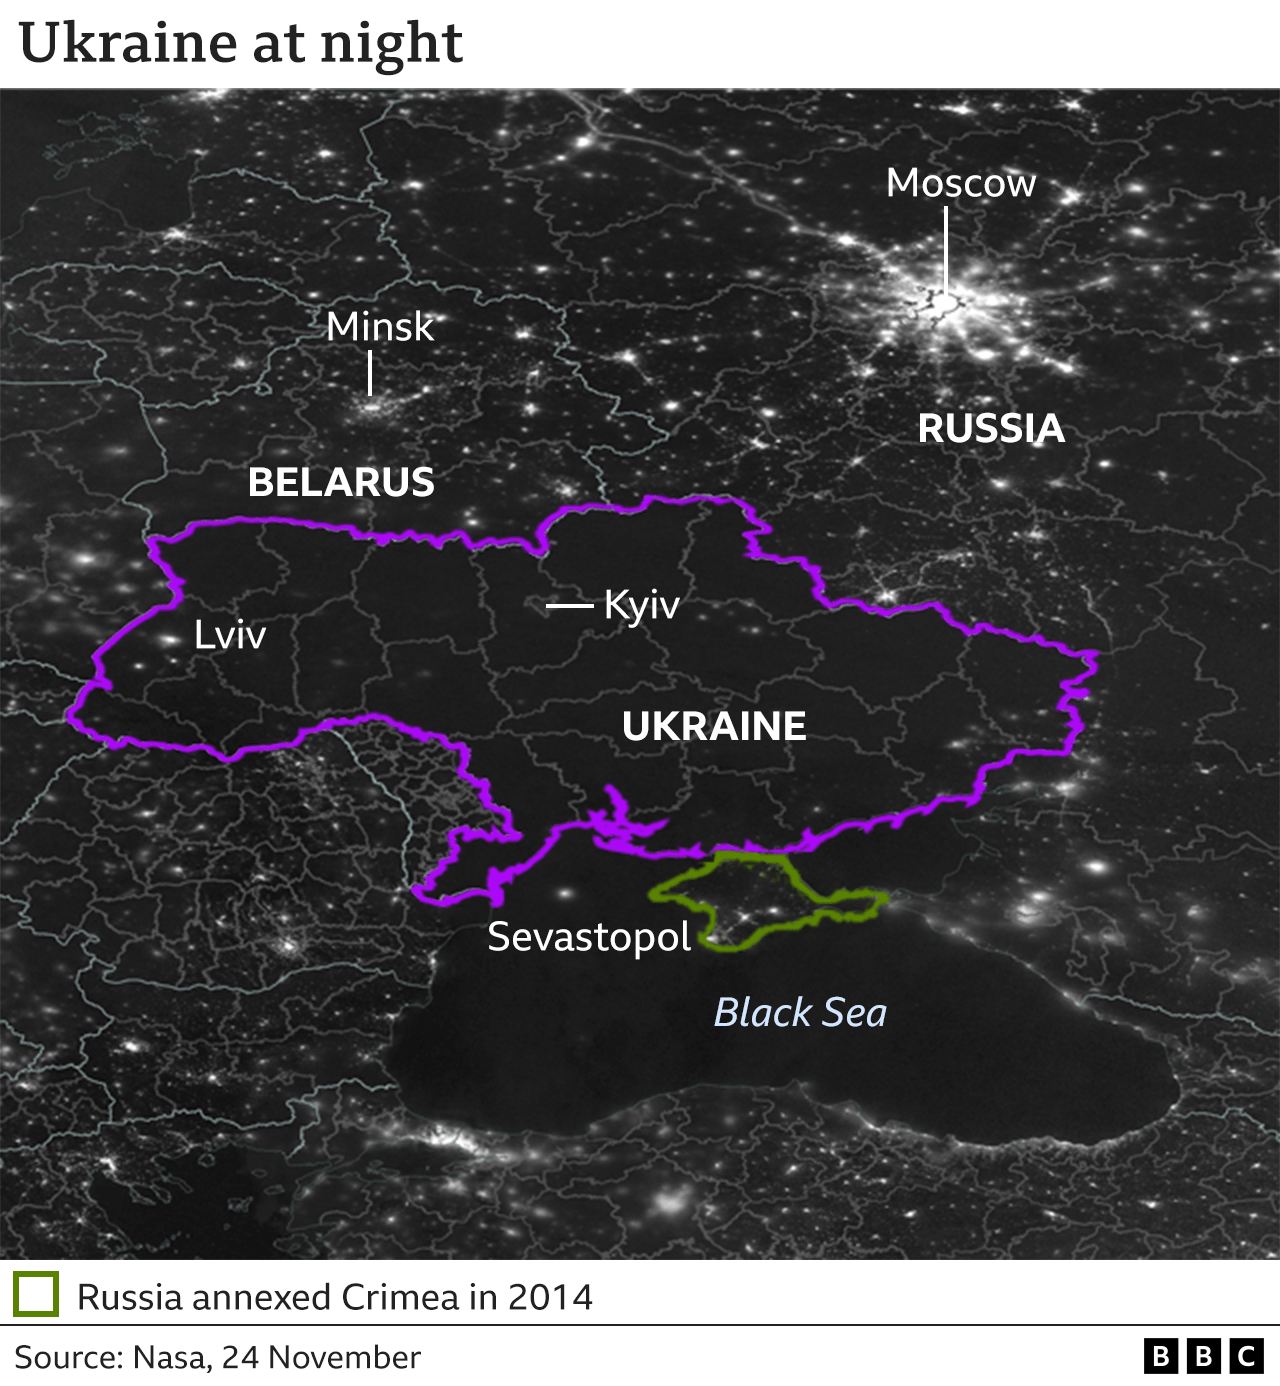 Map showing the areas in Ukraine at night that have lost power